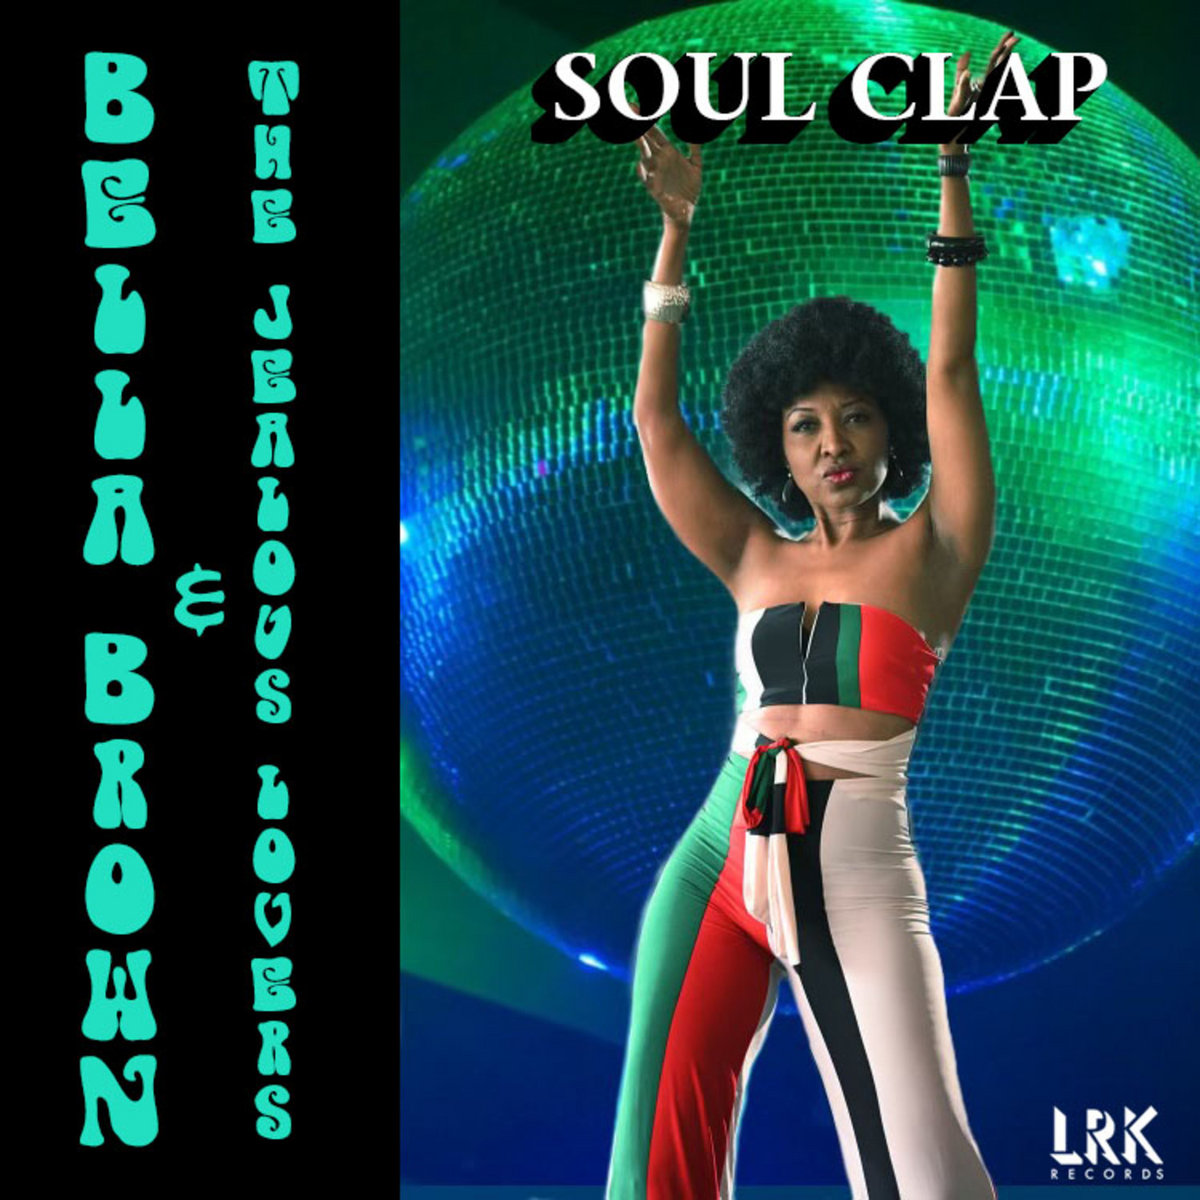 Bella Brown & The Jealous Lovers Rely on the Vanguard V13 for their New Single "Soul Clap"